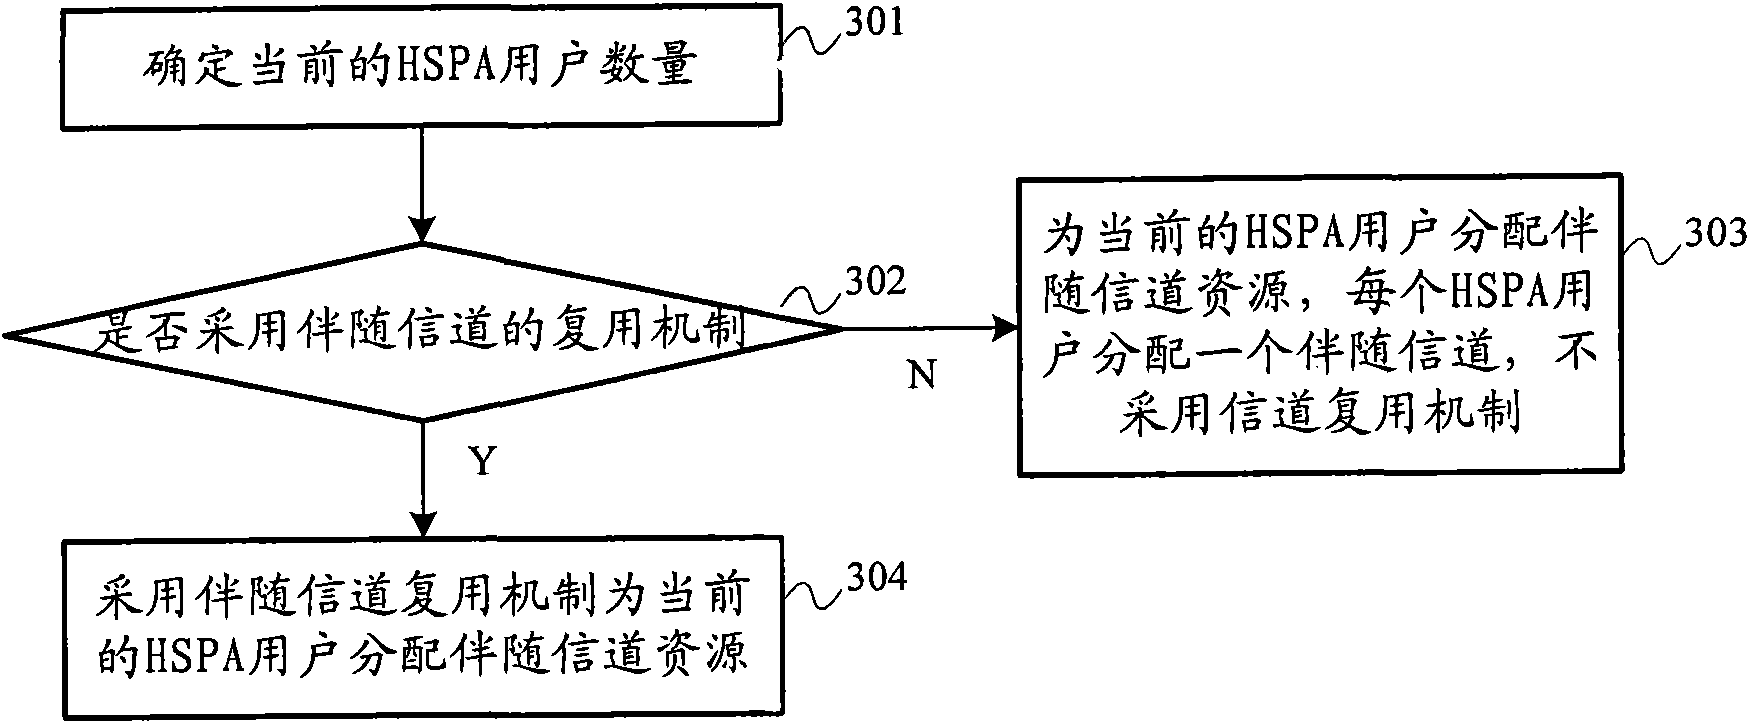 Distribution method of adjoint channels of HSPA (High Speed Packet Access) system, base station and system